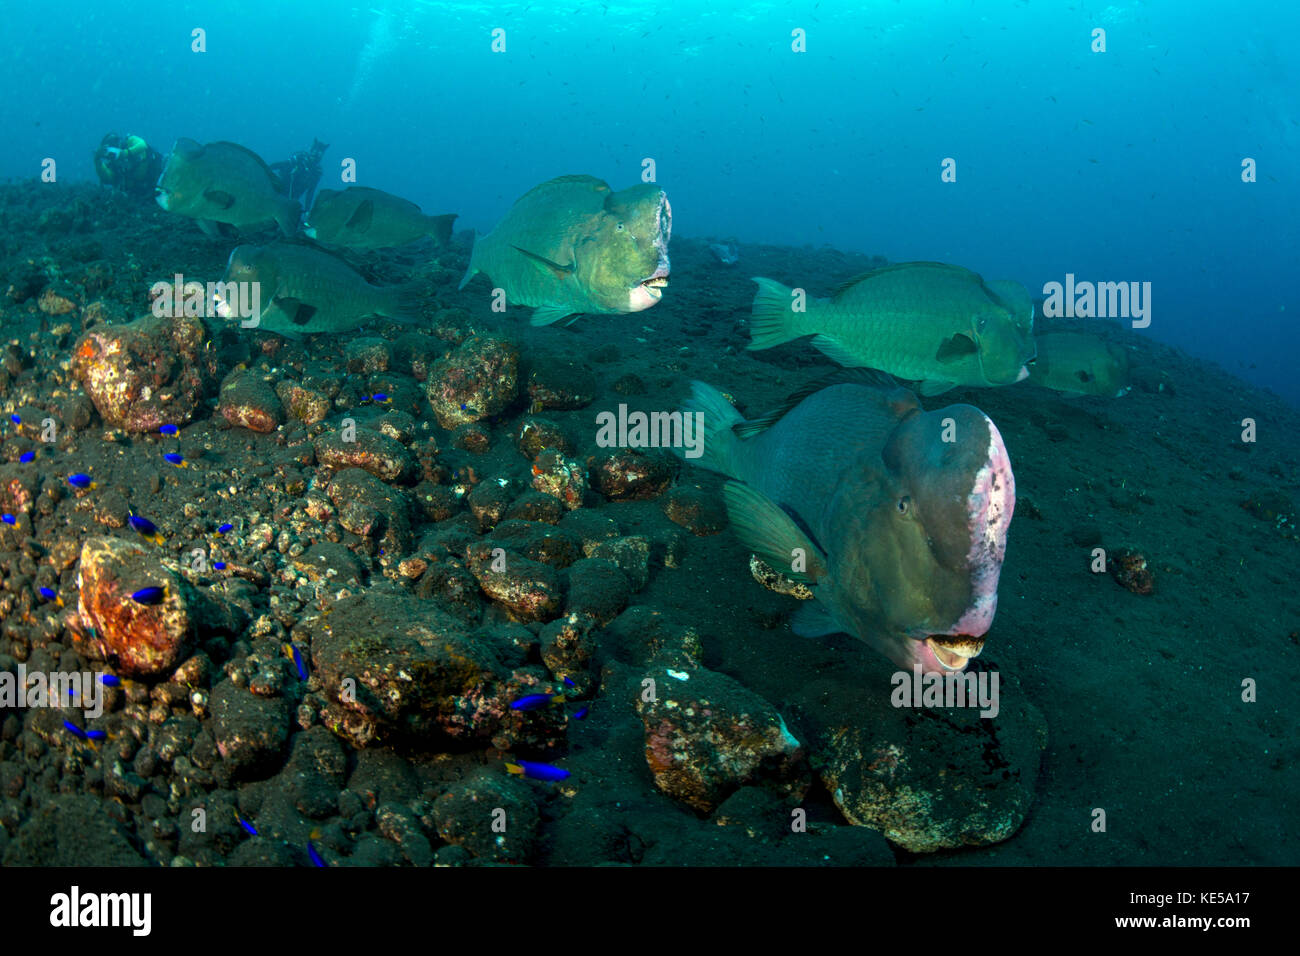 Several bumphead parrotfish swimming over black sand near the Liberty Wreck in Indonesia. Stock Photo